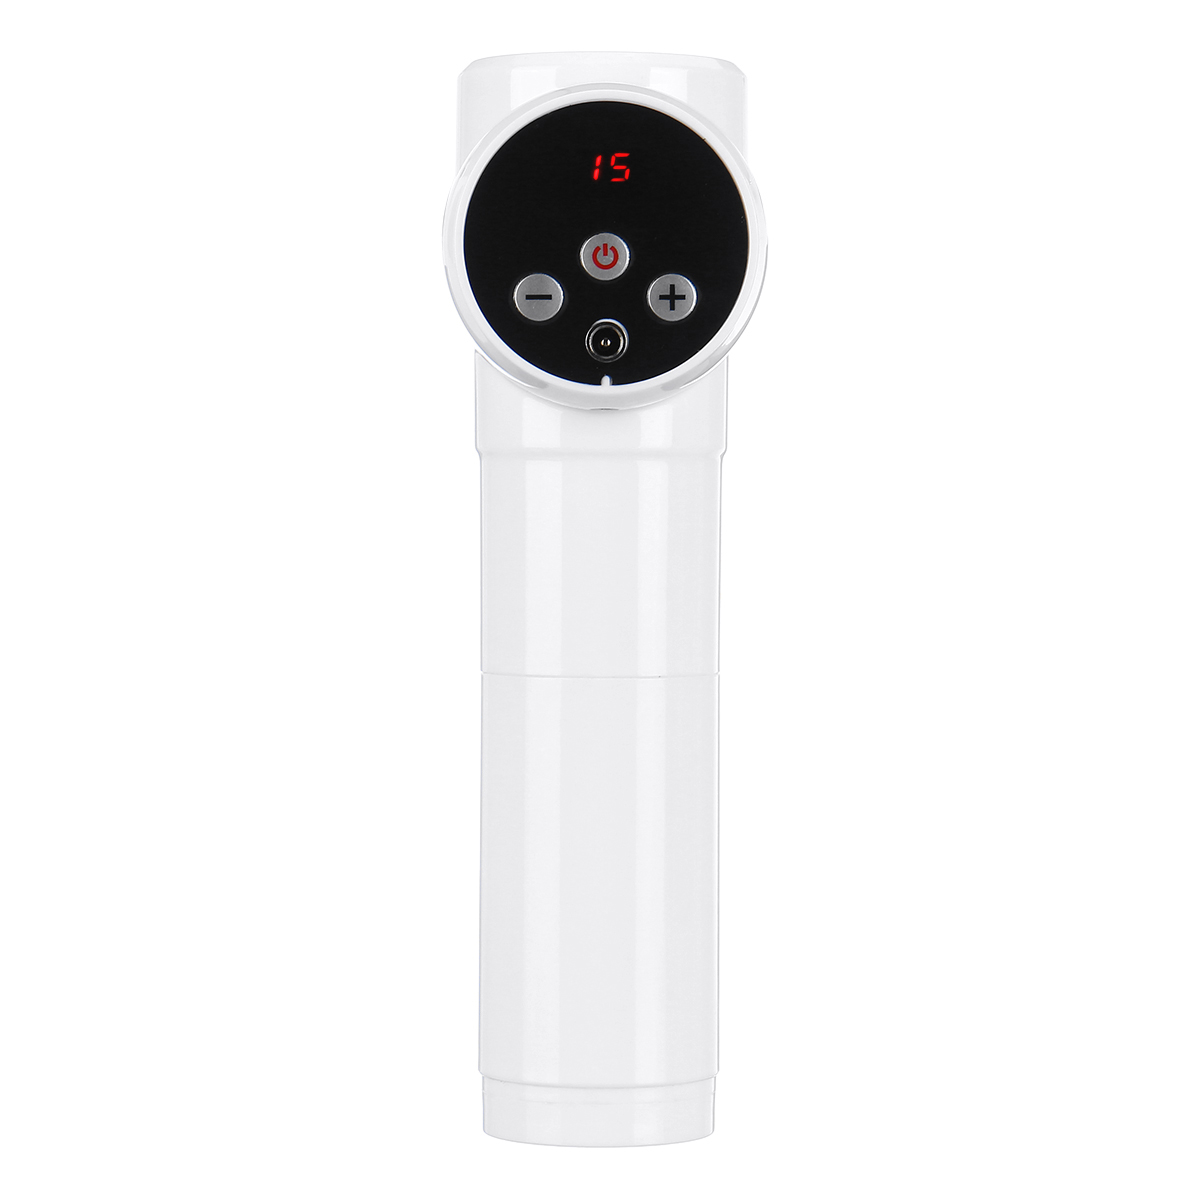 2000mAh-Electric-Muscle-Massager-USB-Rechargable-20-Speeds-With-8-Heads-Deep-Vibration-Relaxing-Ther-1712856-8